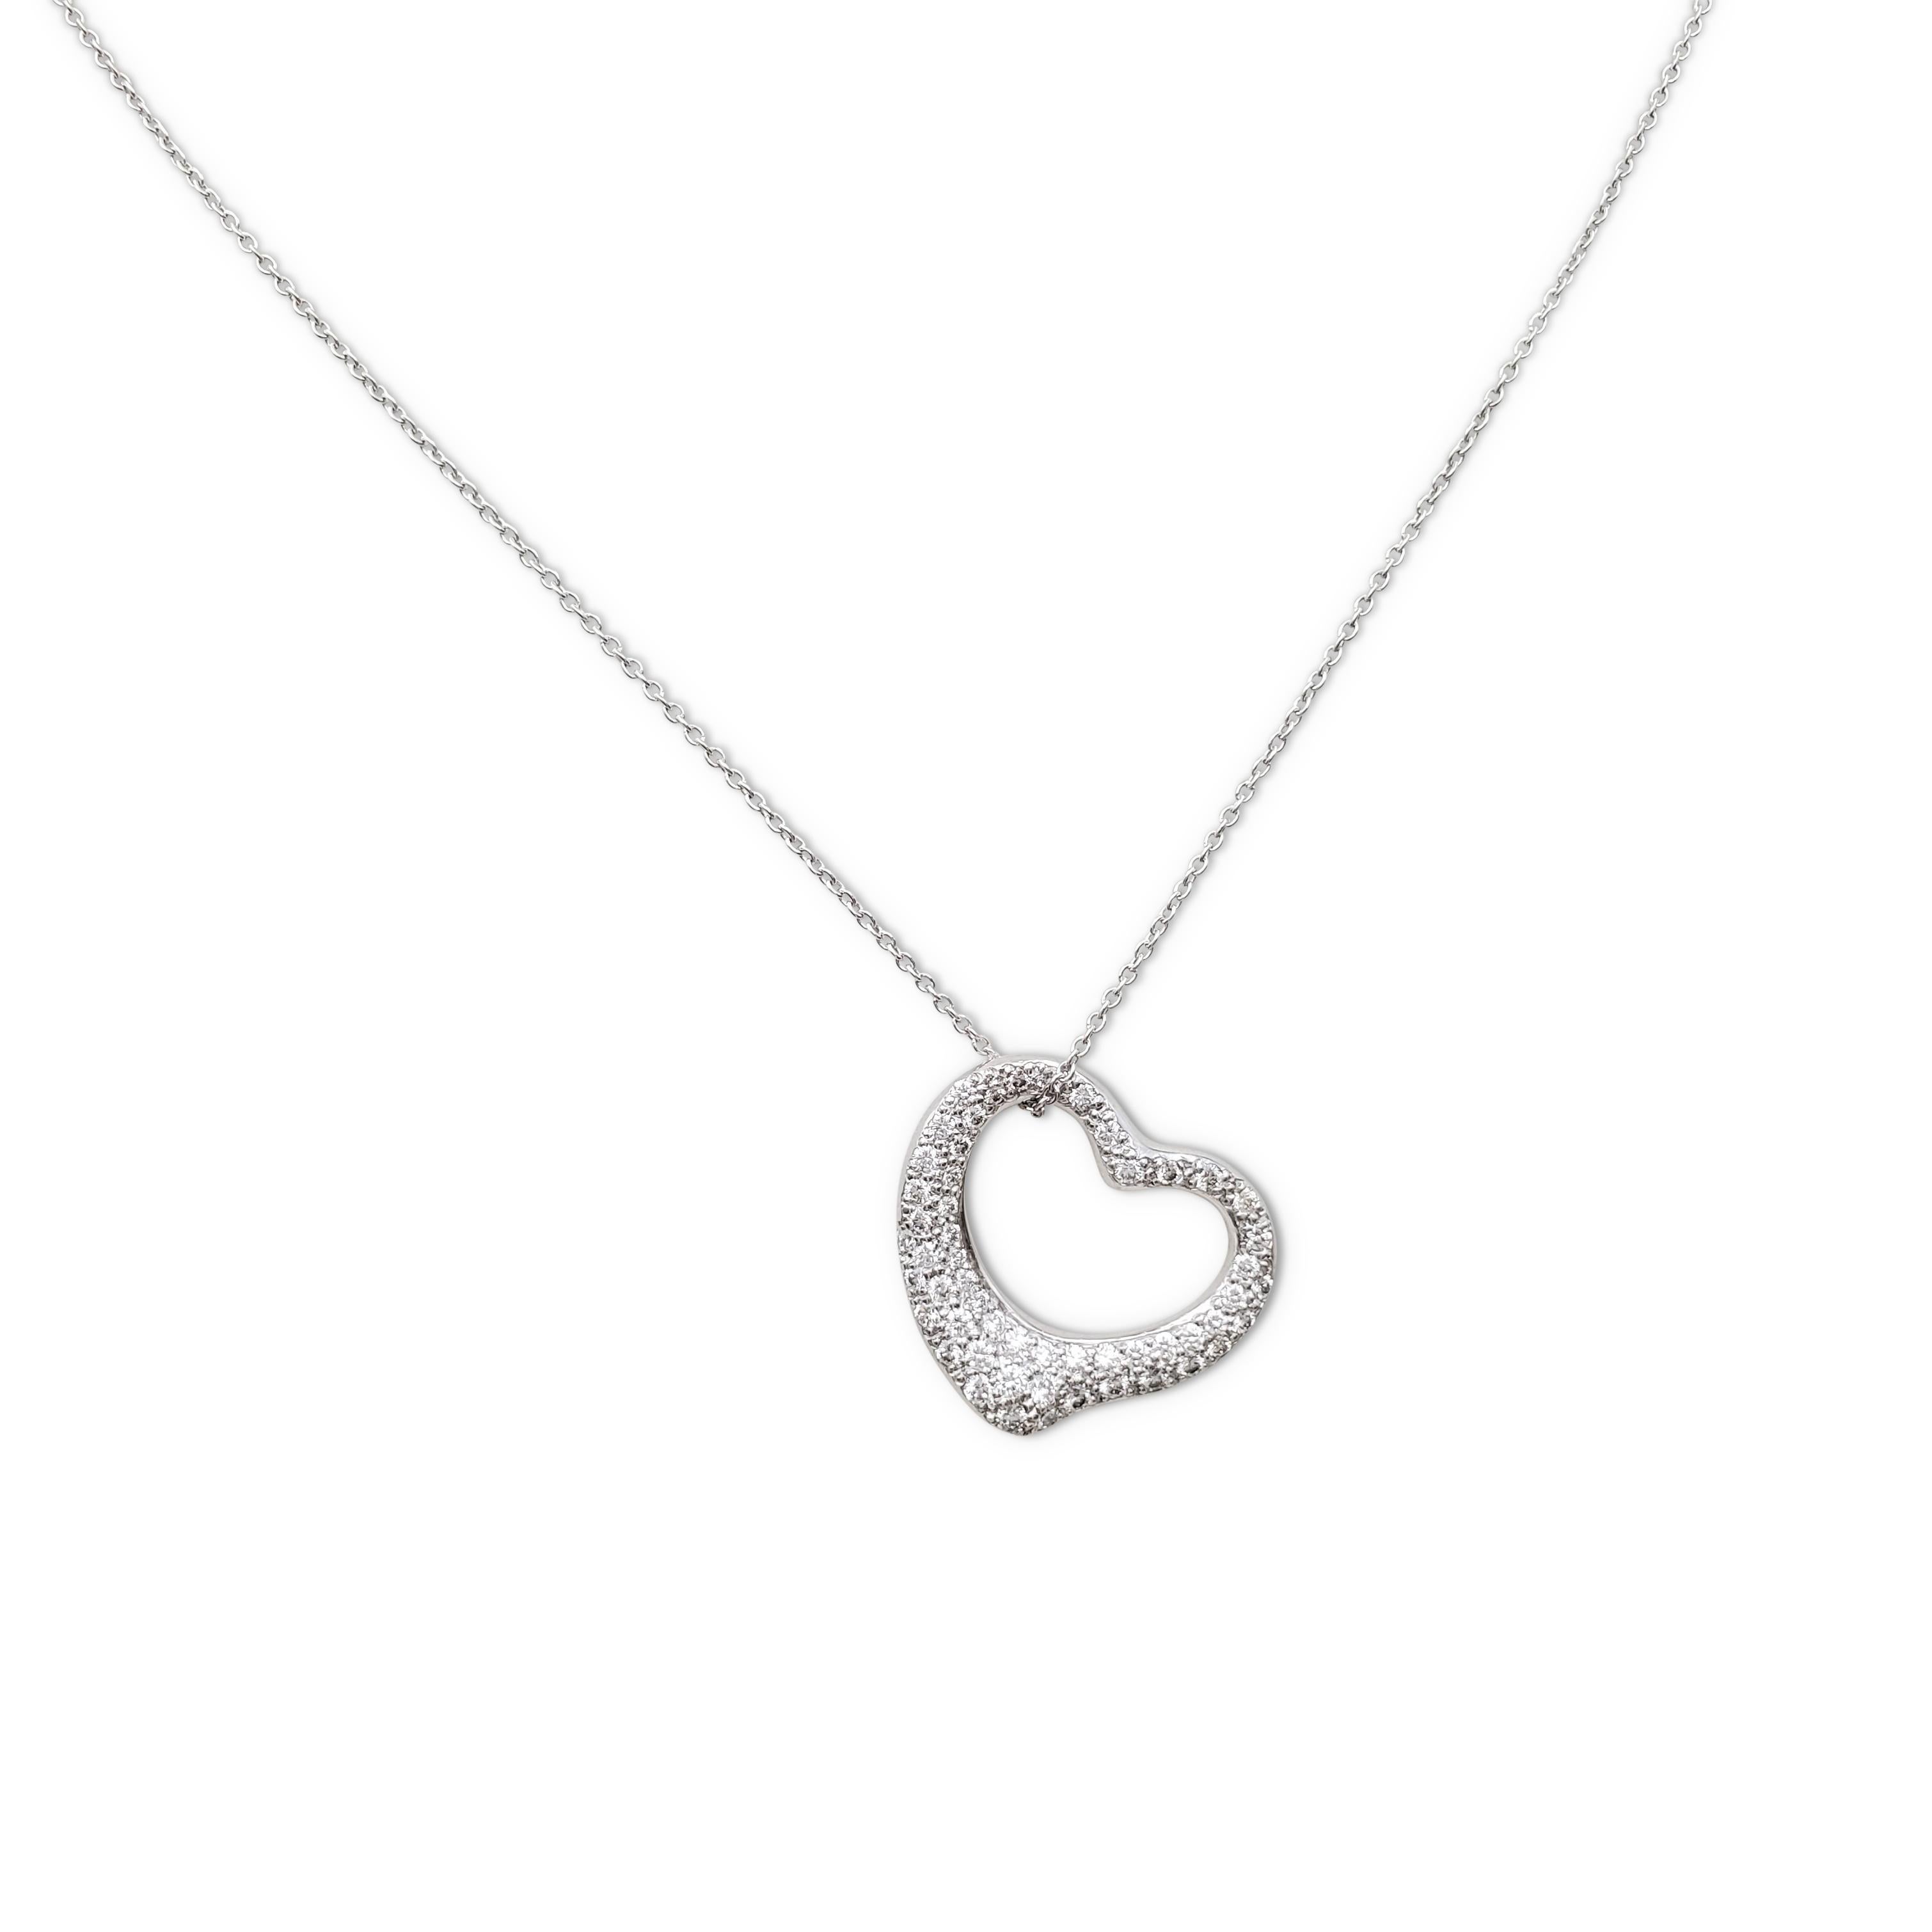 Authentic Elsa Peretti for Tiffany & Co. open heart pendant necklace crafted in platinum and set with an estimated 1.20 carats of sparkling round brilliant cut diamonds (E-F, VS clarity). Signed Tiffany & Co., Elsa Peretti, PT950, Spain. The